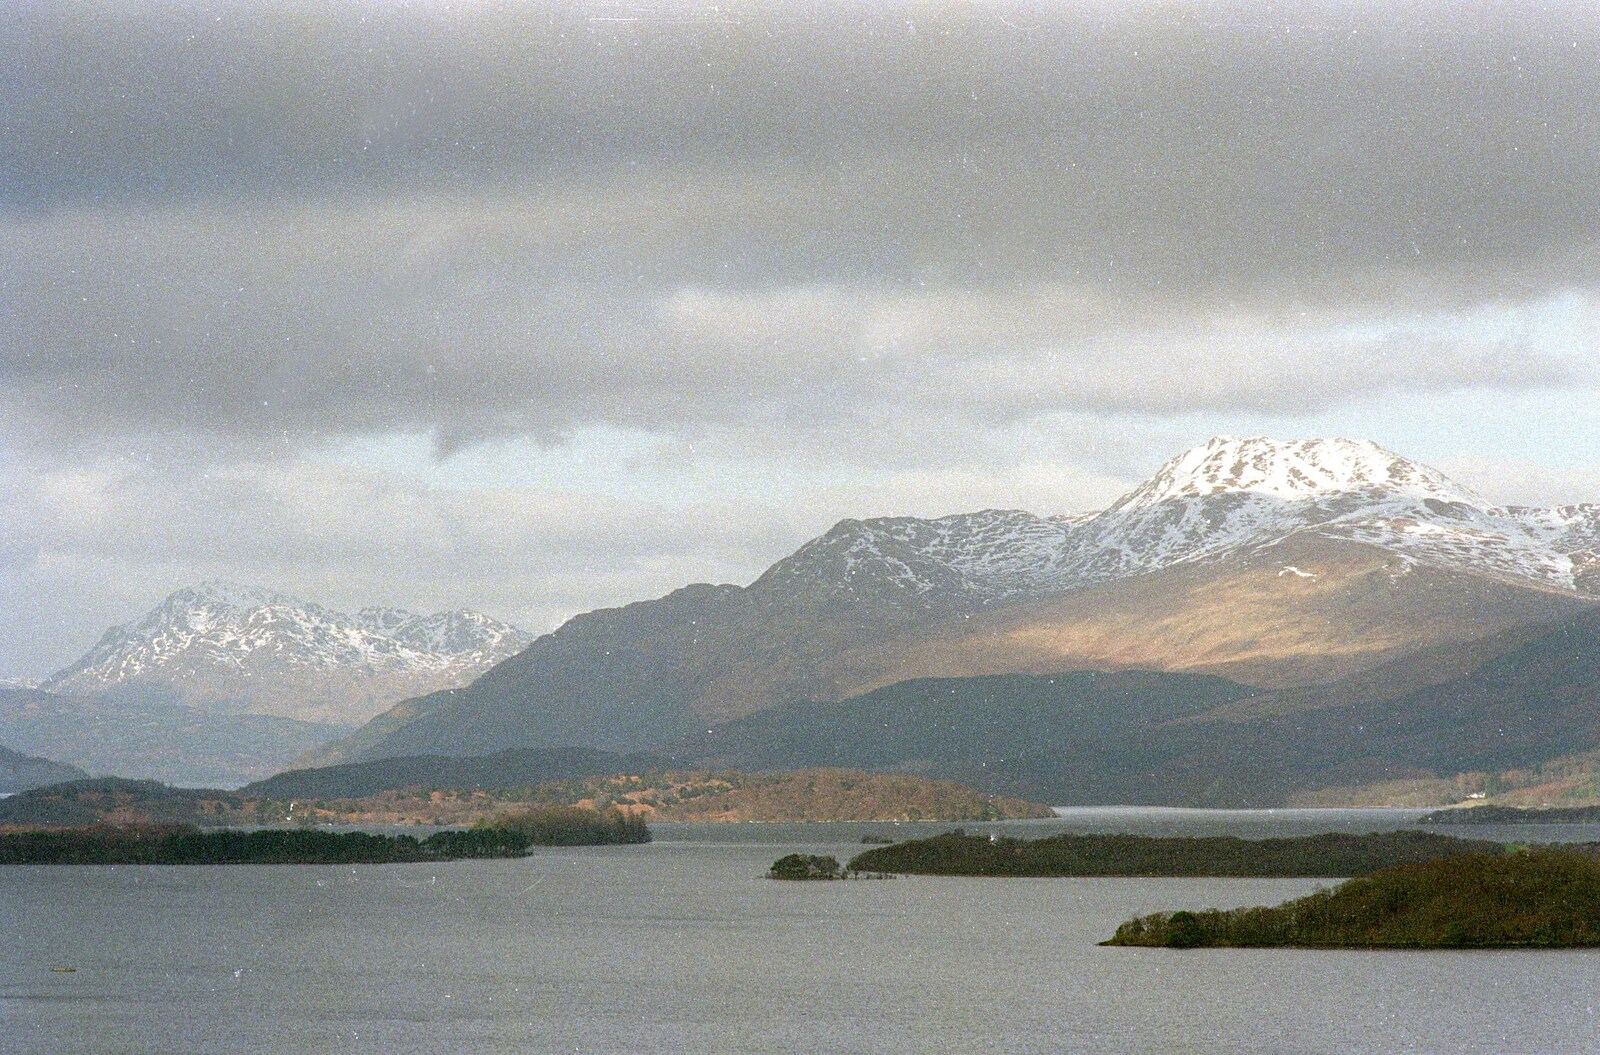 The snow covered mountains of Loch Lomond from Sandbach to Loch Lomond, Cheshire and Scotland - 10th December 1987